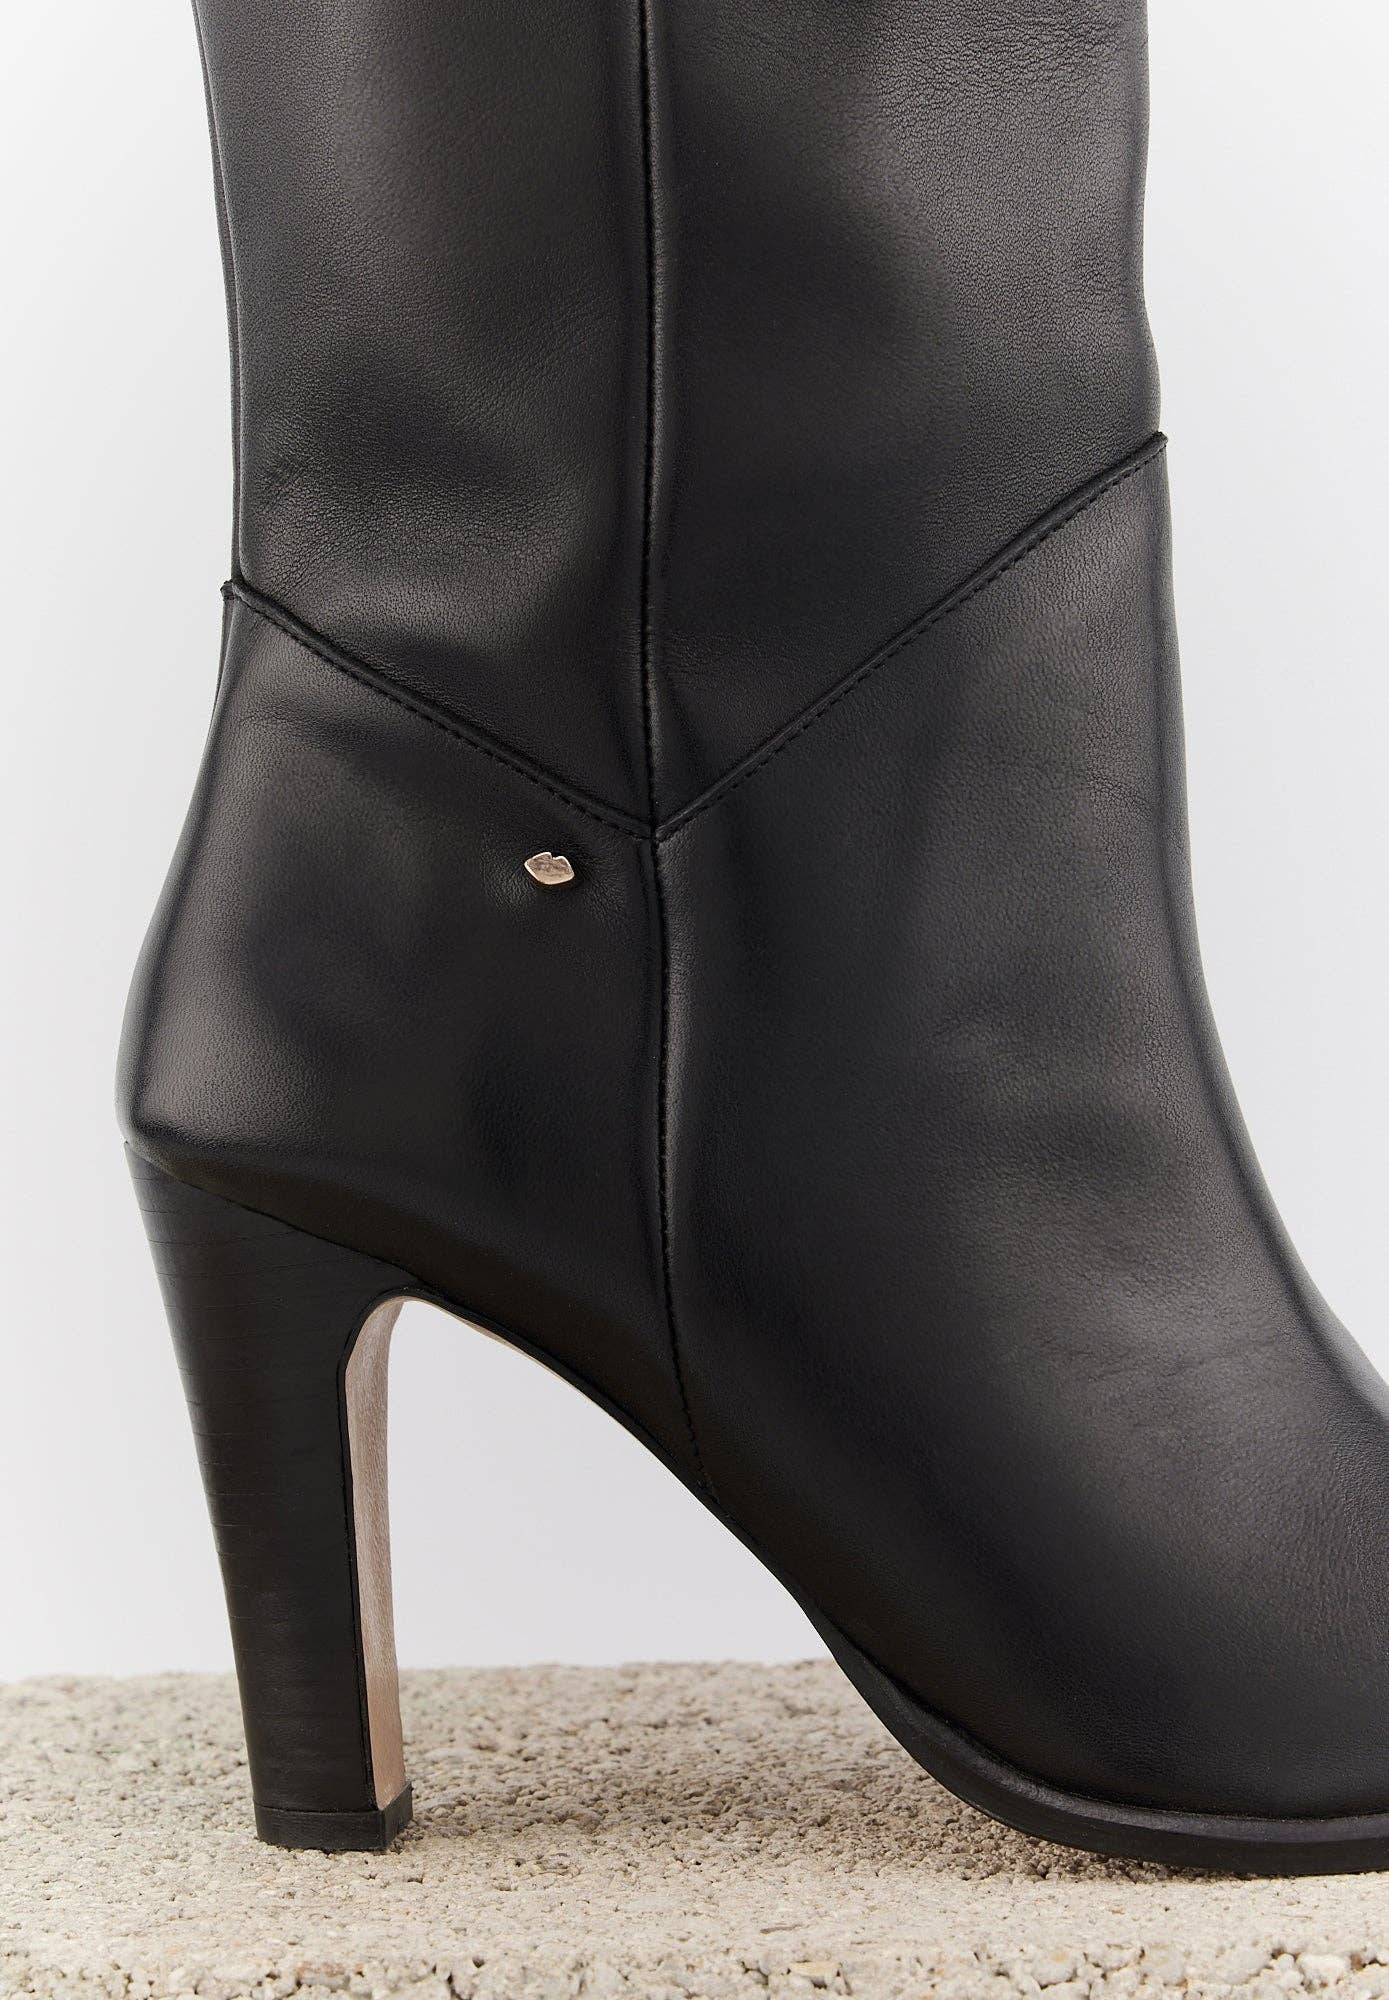 Bons Baisers Paris - Adele Smooth Black Leather Boots